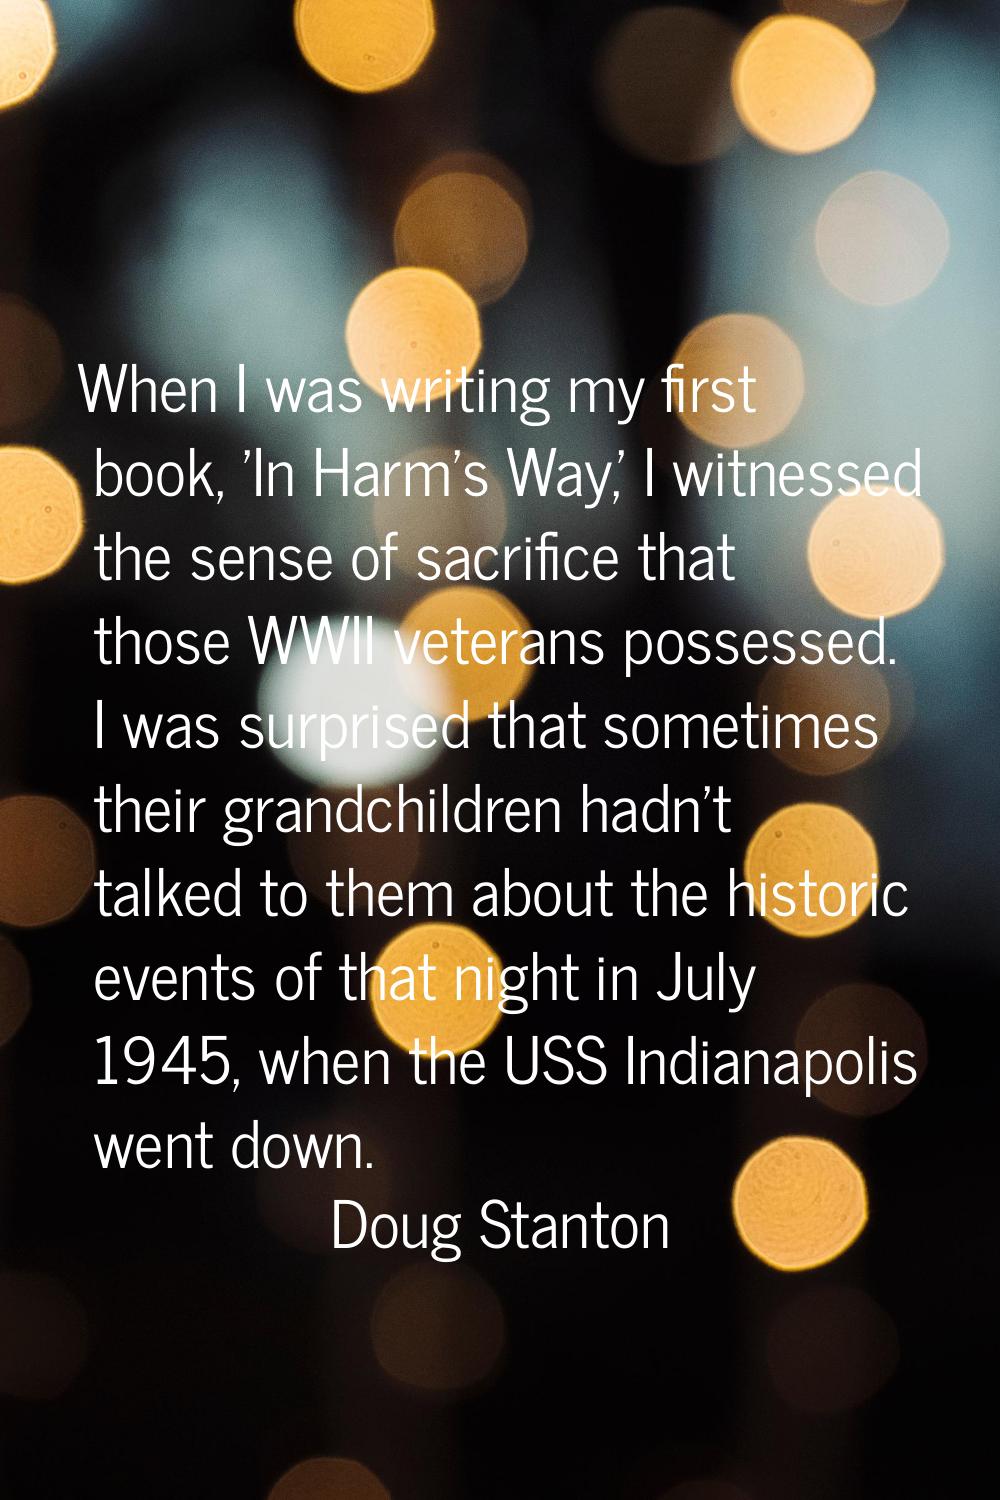 When I was writing my first book, 'In Harm's Way,' I witnessed the sense of sacrifice that those WW